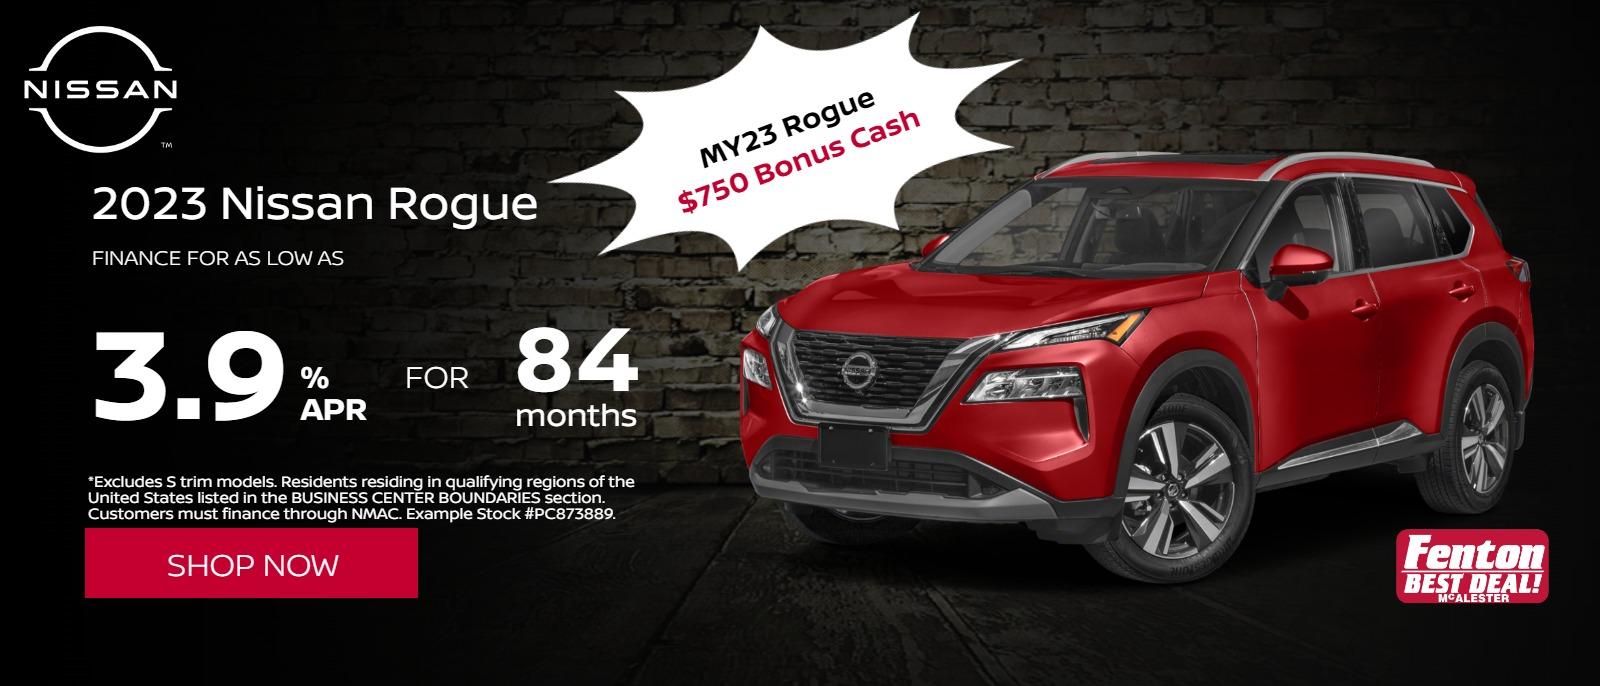 23 Rogue
3.9% APR @ 84 months
 Financing available on 2023 Nissan Rogue
*Residents residing in qualifying regions of the United States listed in the BUSINESS CENTER BOUNDARIES section. Customers must finance through NMAC